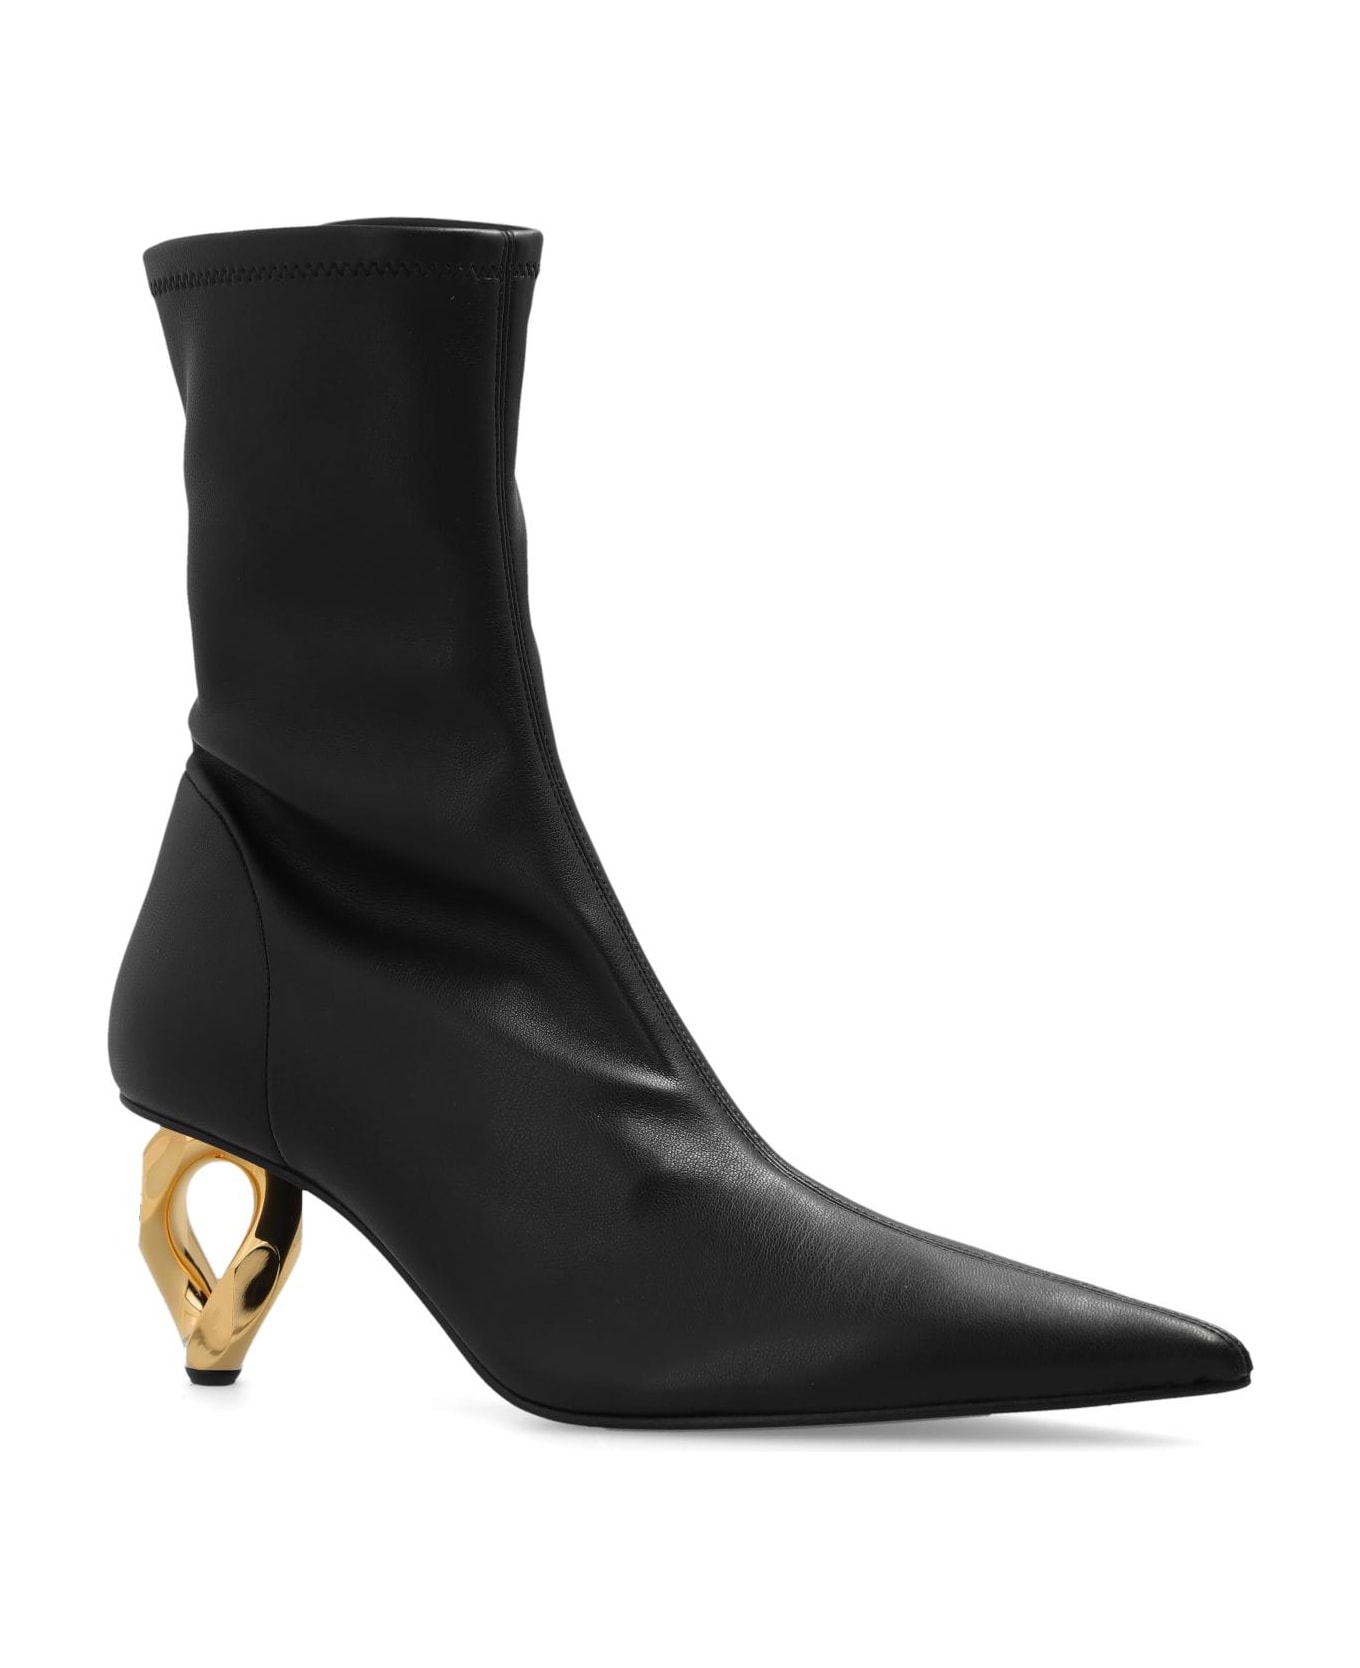 J.W. Anderson Heeled Ankle Boots - Black ブーツ